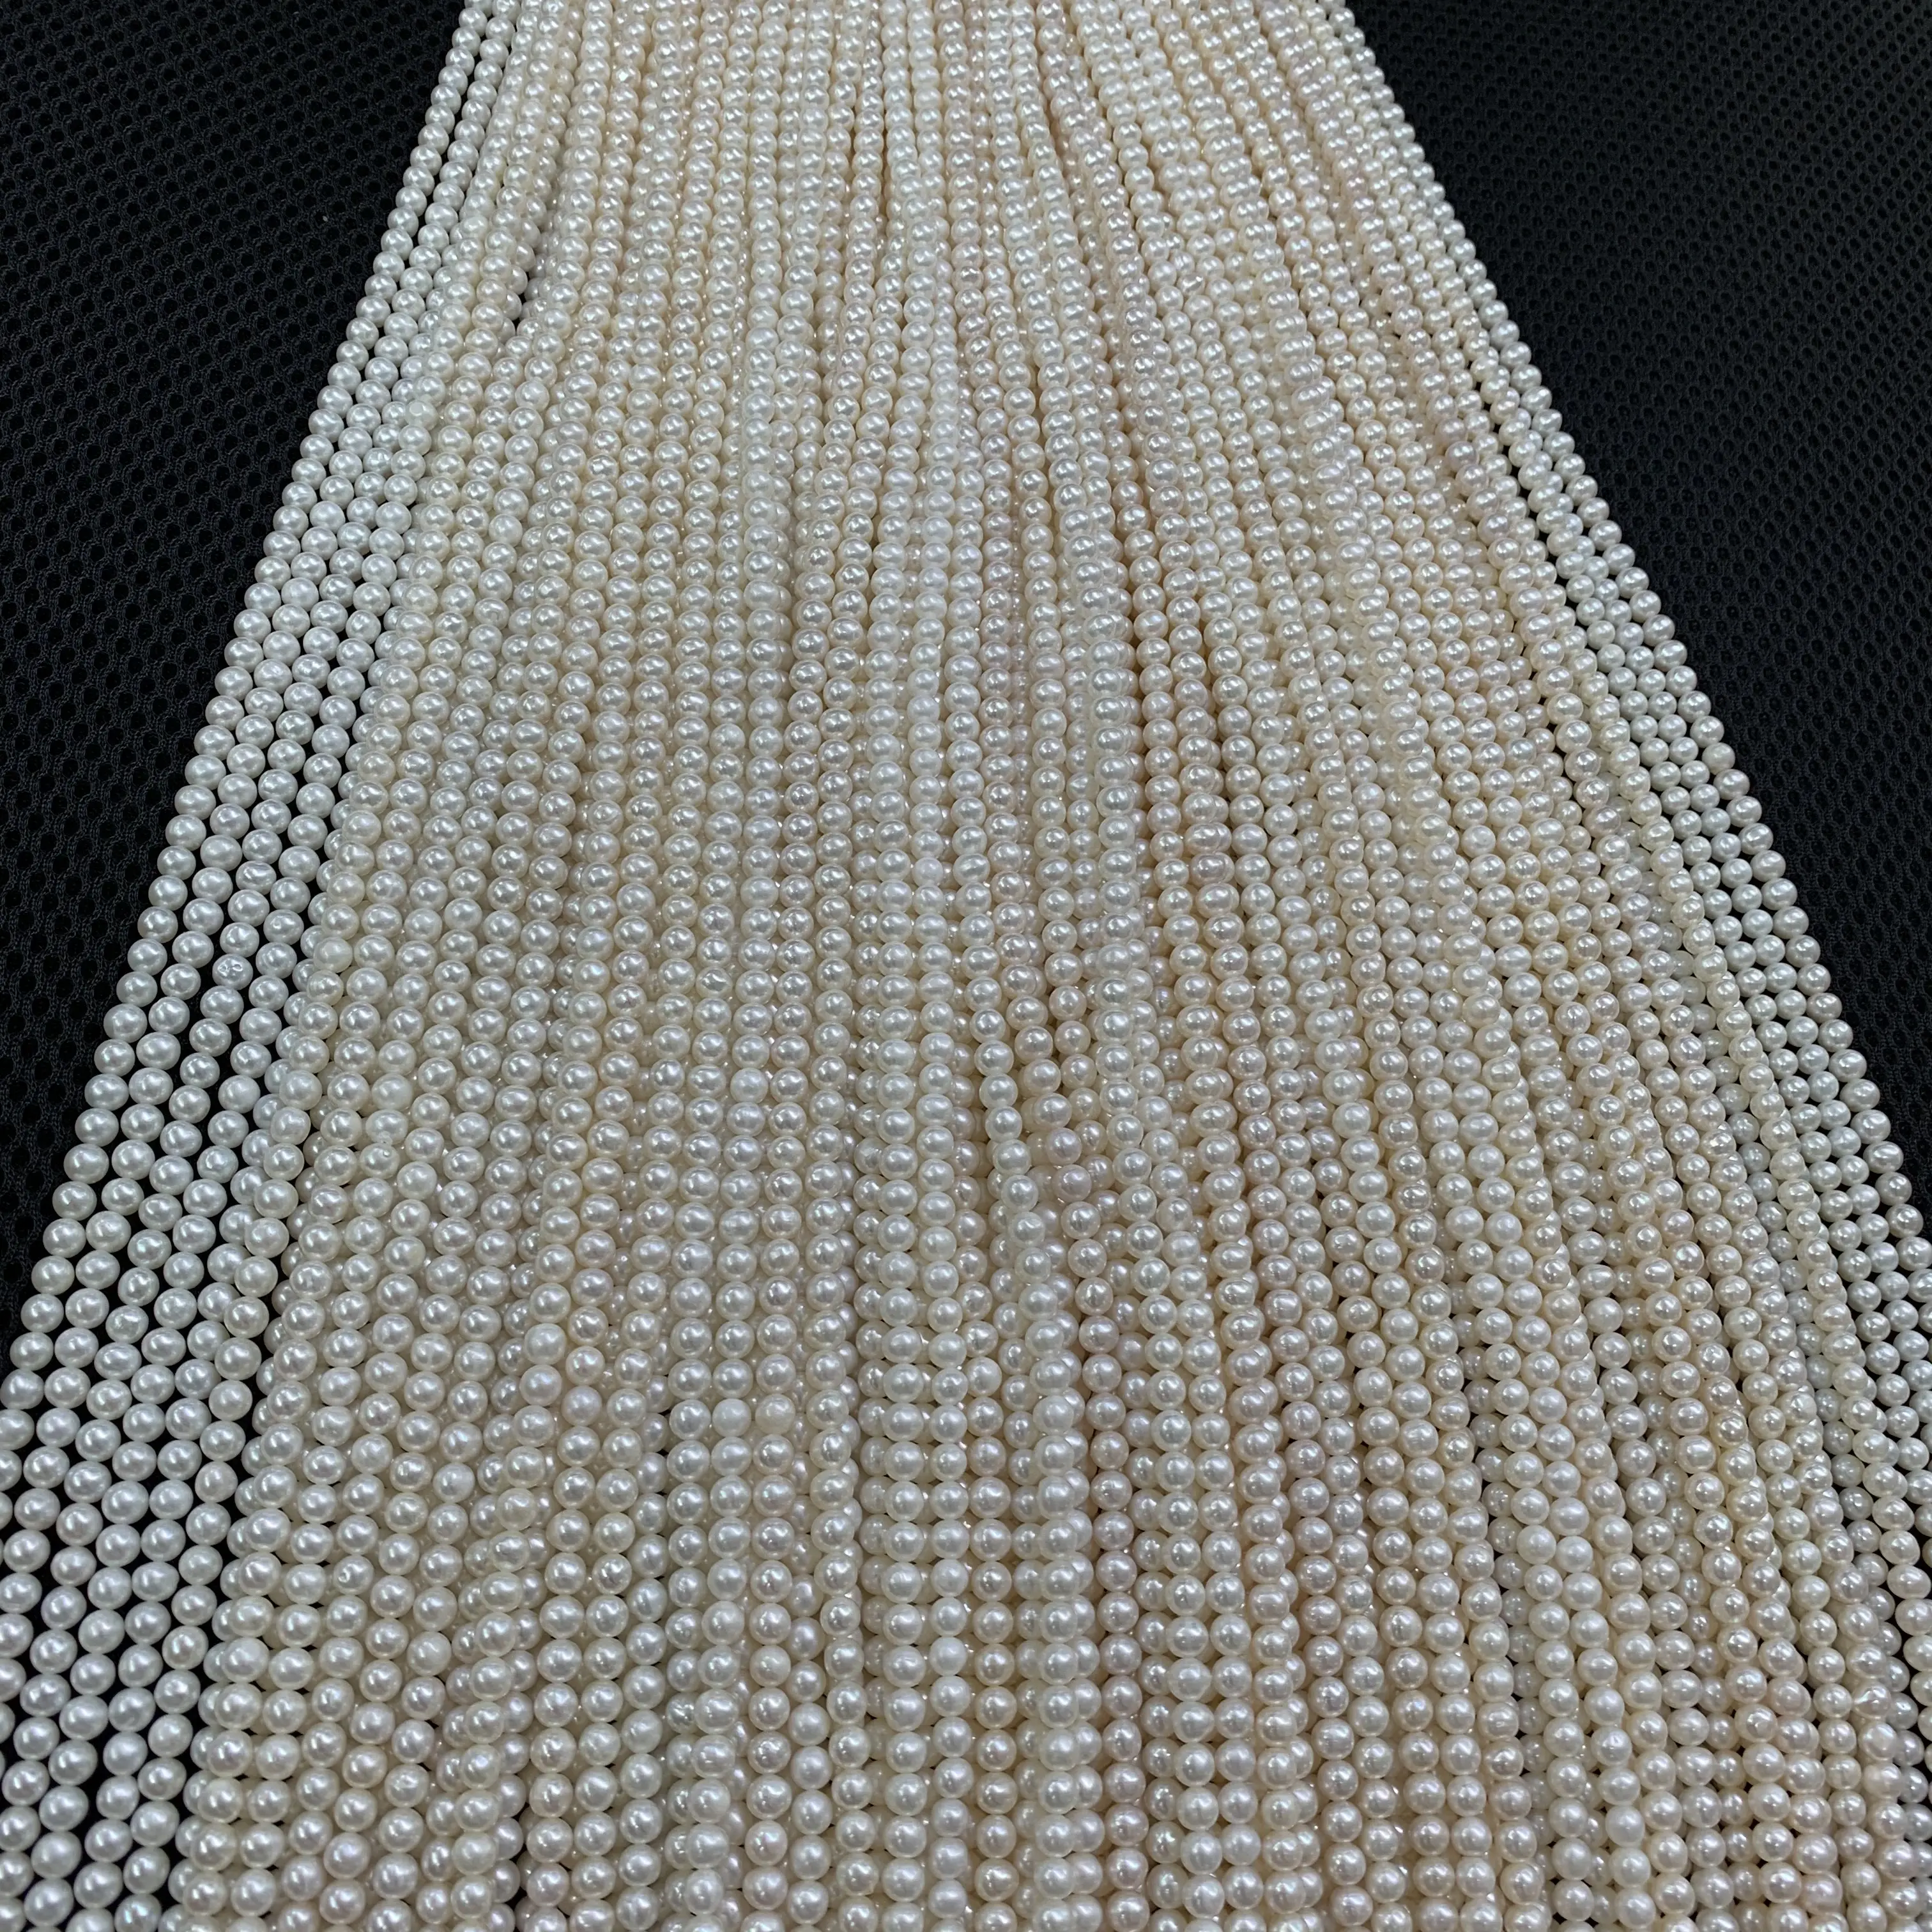 4-5mm white cultured natural real freshwater pearl strand string beads wholesale loose near round fresh water freshwater pearl